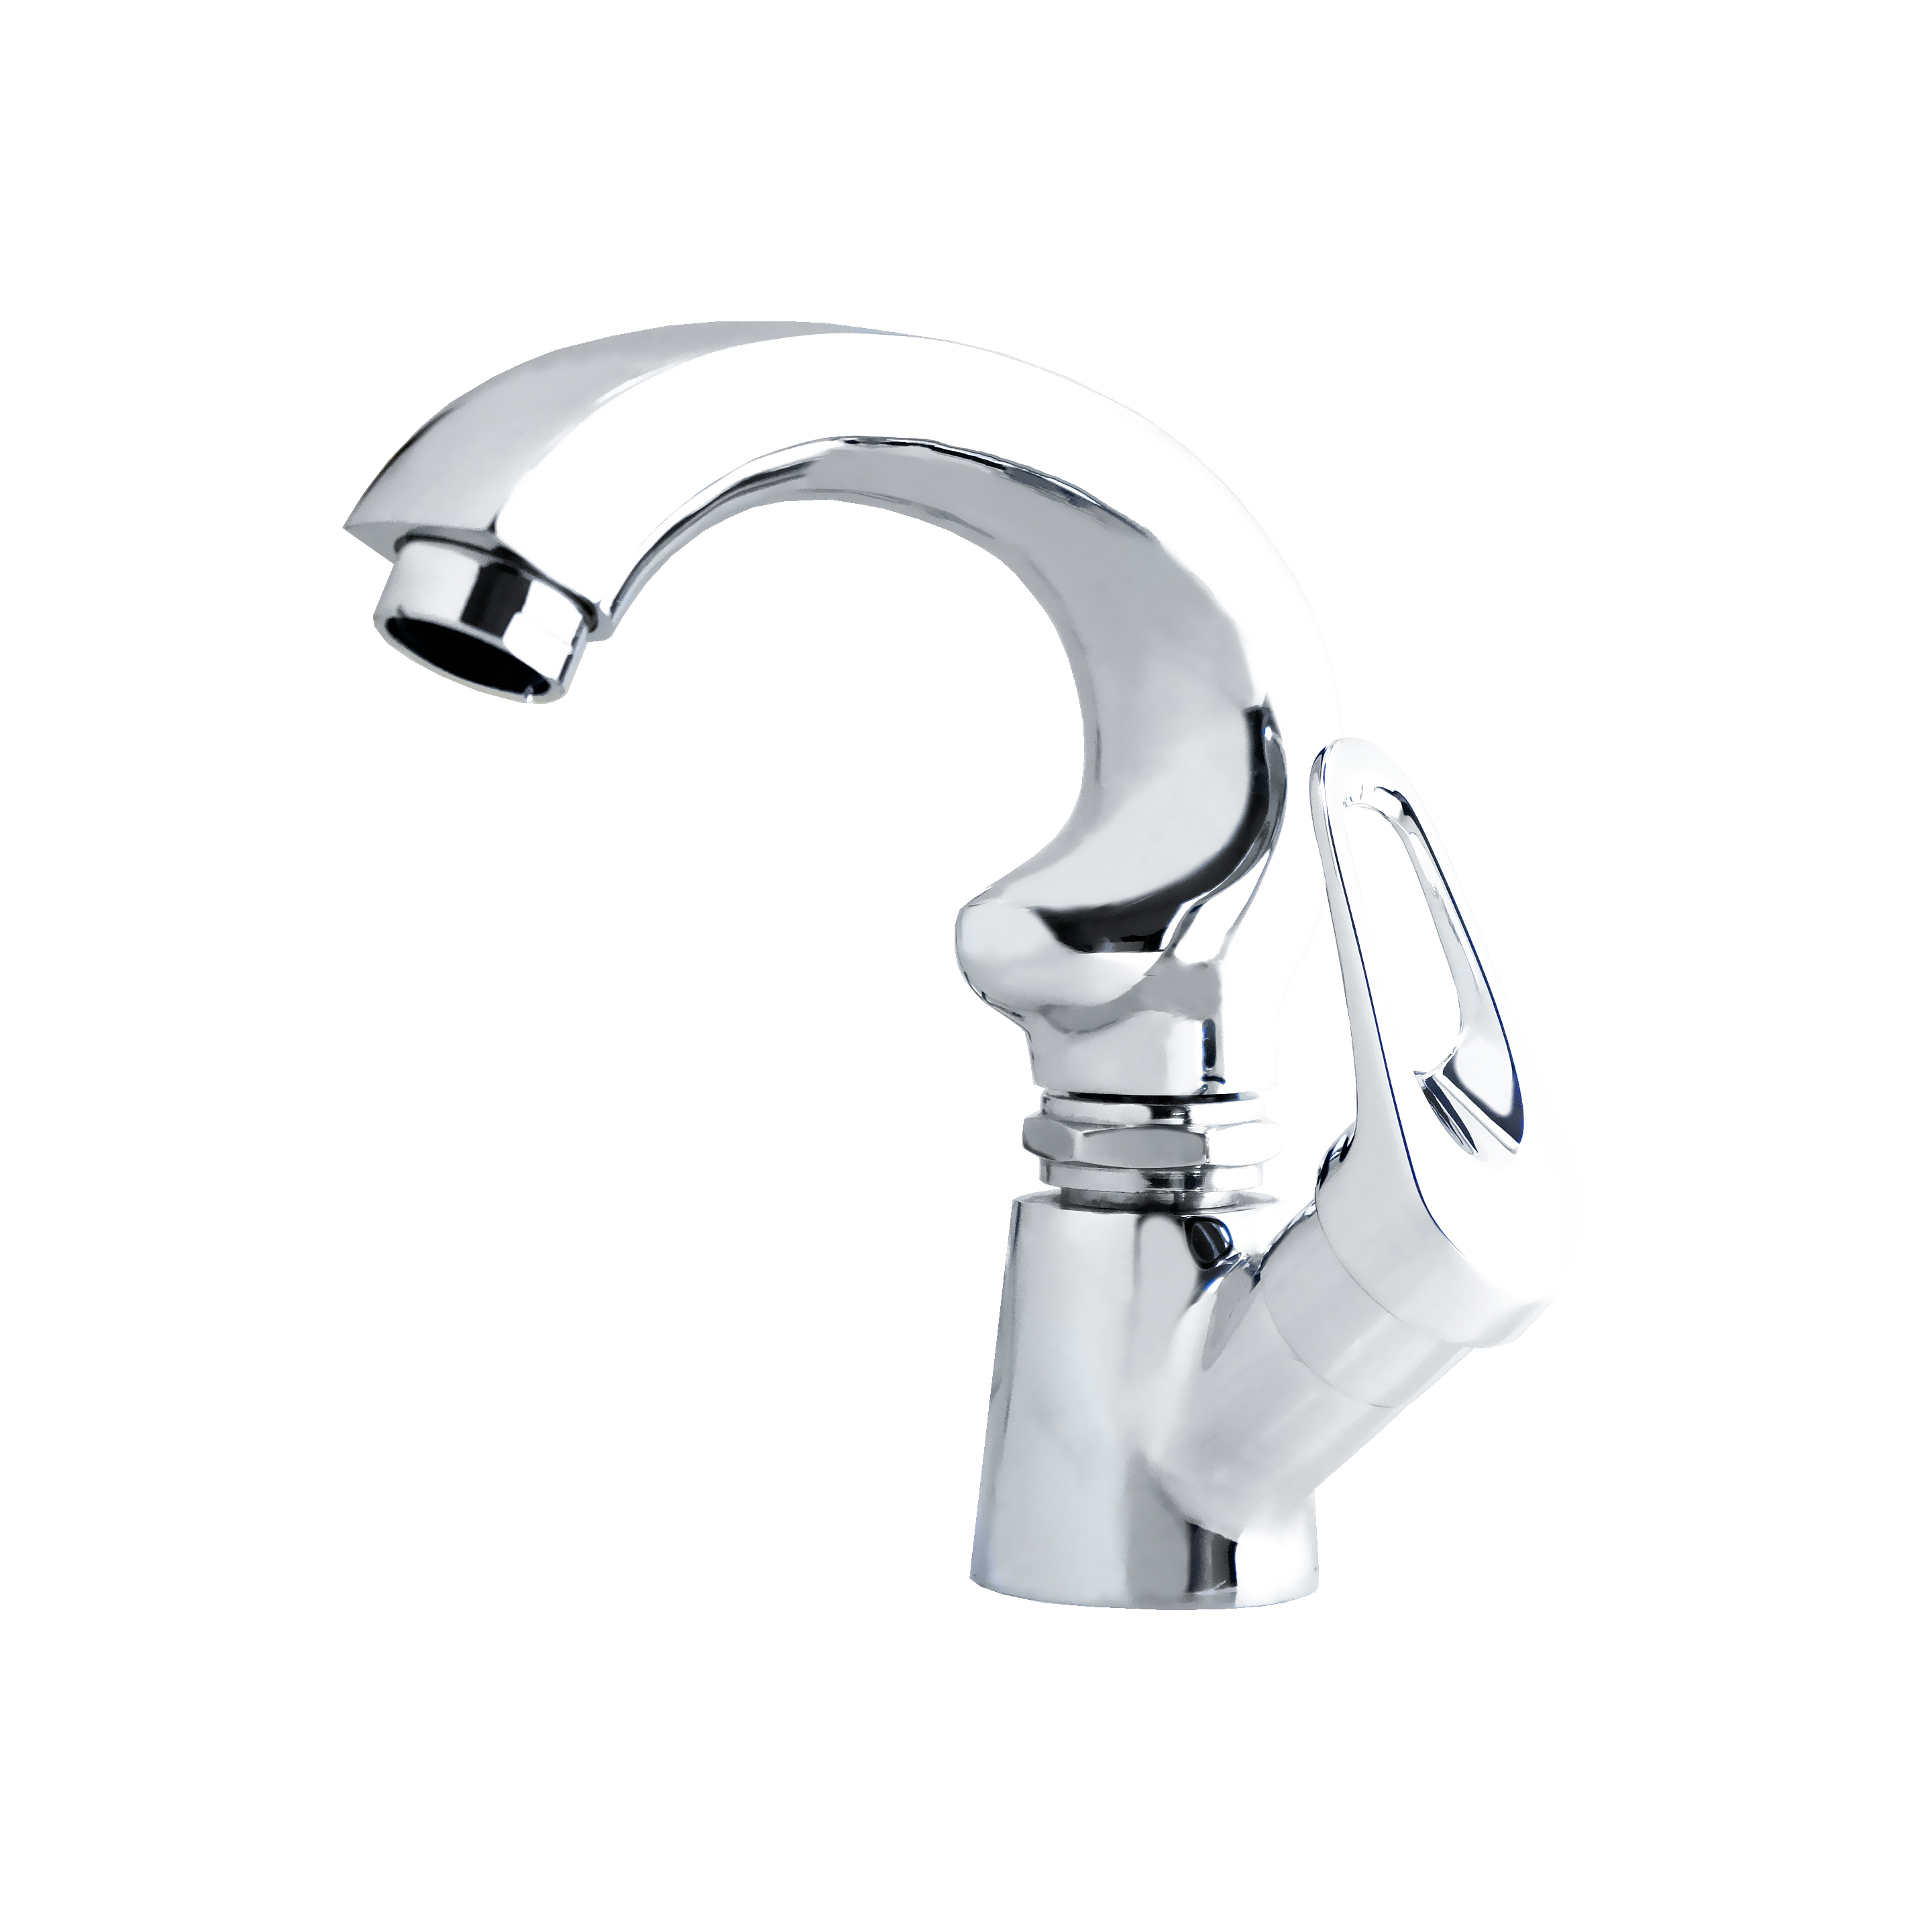 Fuero Sink Cock with Swivel Spout (Table Mounted)